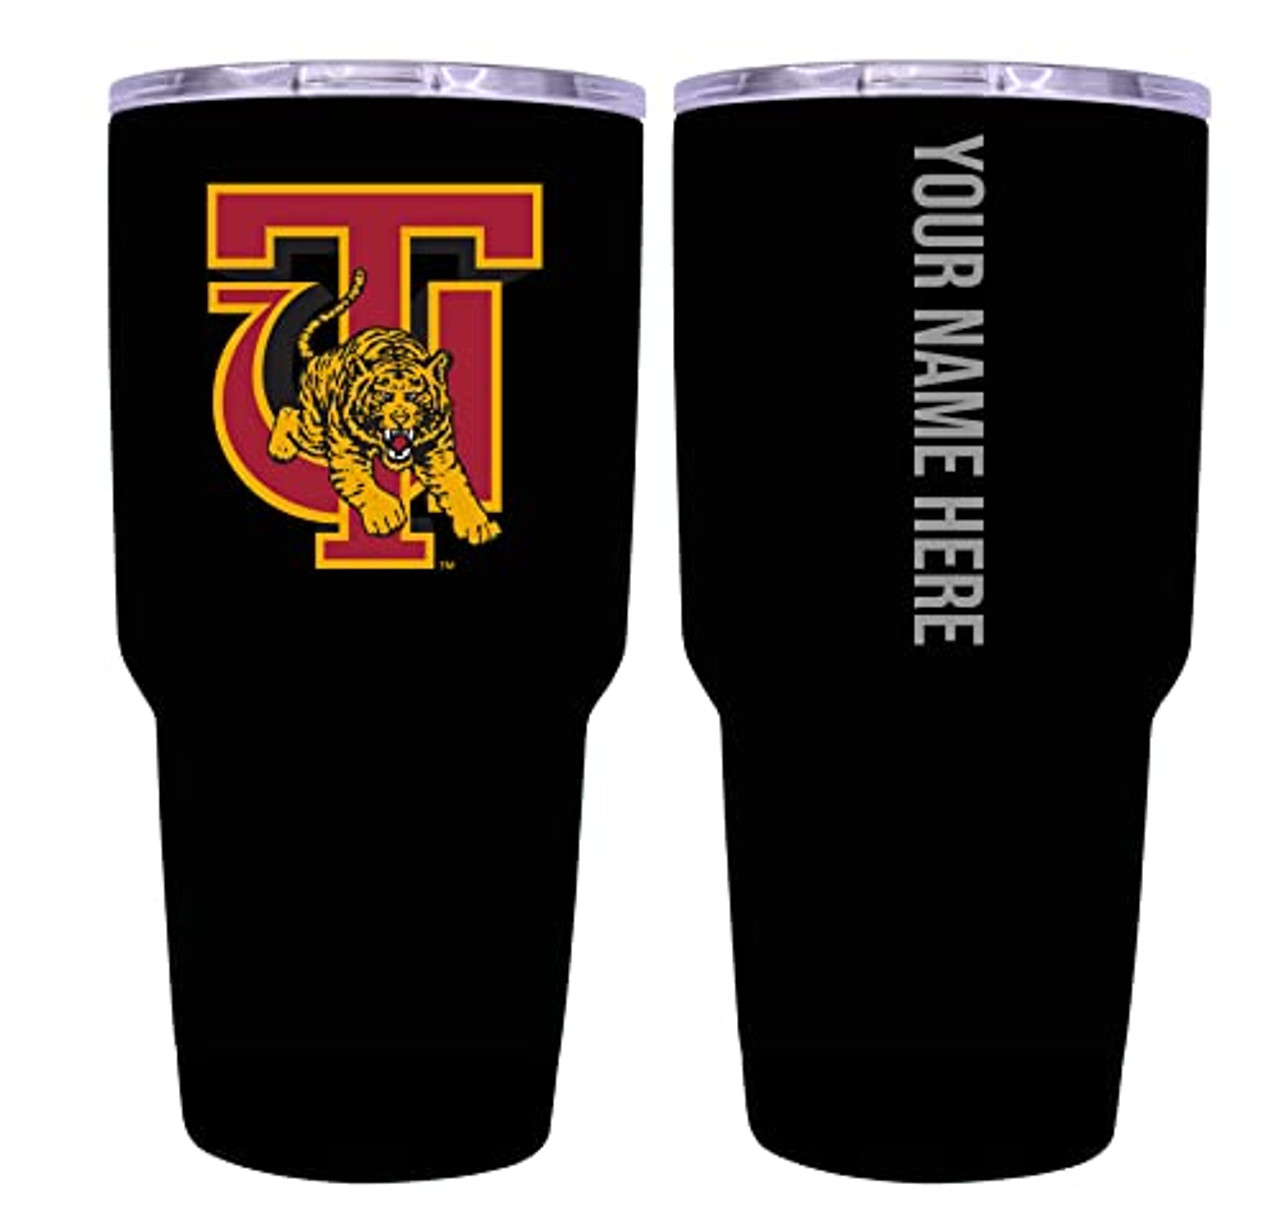 Collegiate Custom Personalized Tuskegee University, 24 oz Insulated Stainless Steel Tumbler with Engraved Name (Black)